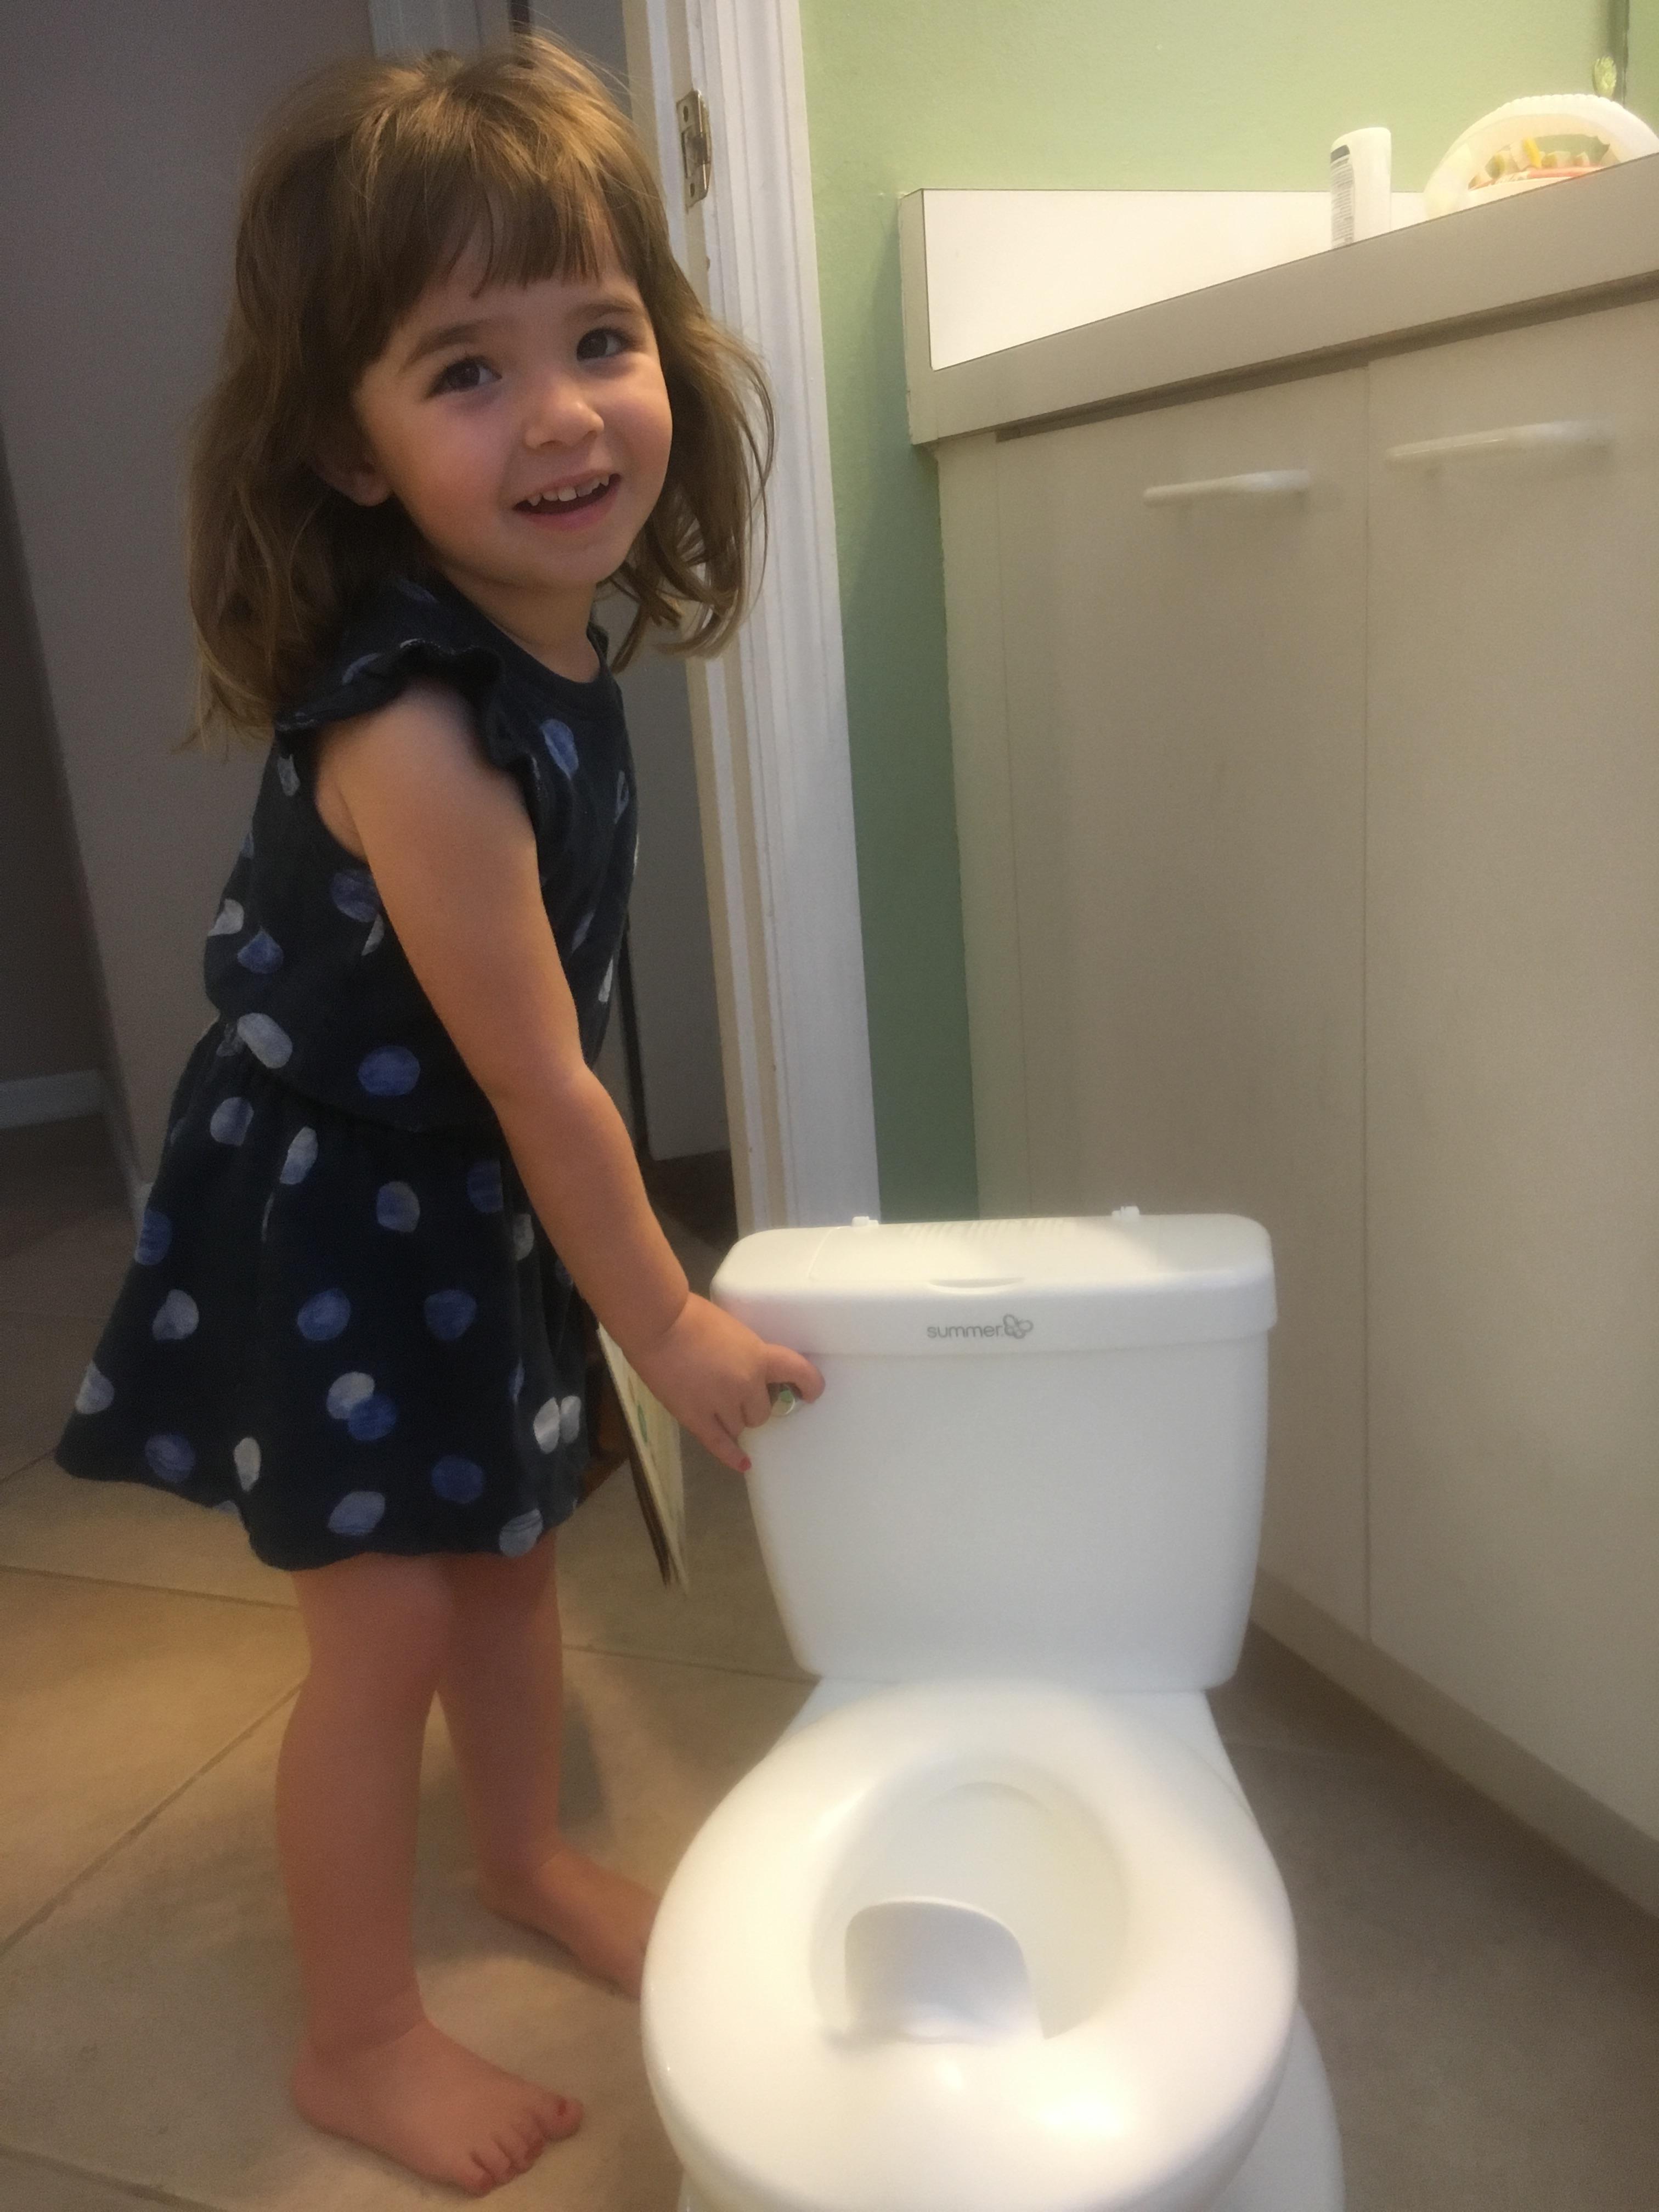 Potty Training Made Easy With Summer Infant's My Size Potty EEA